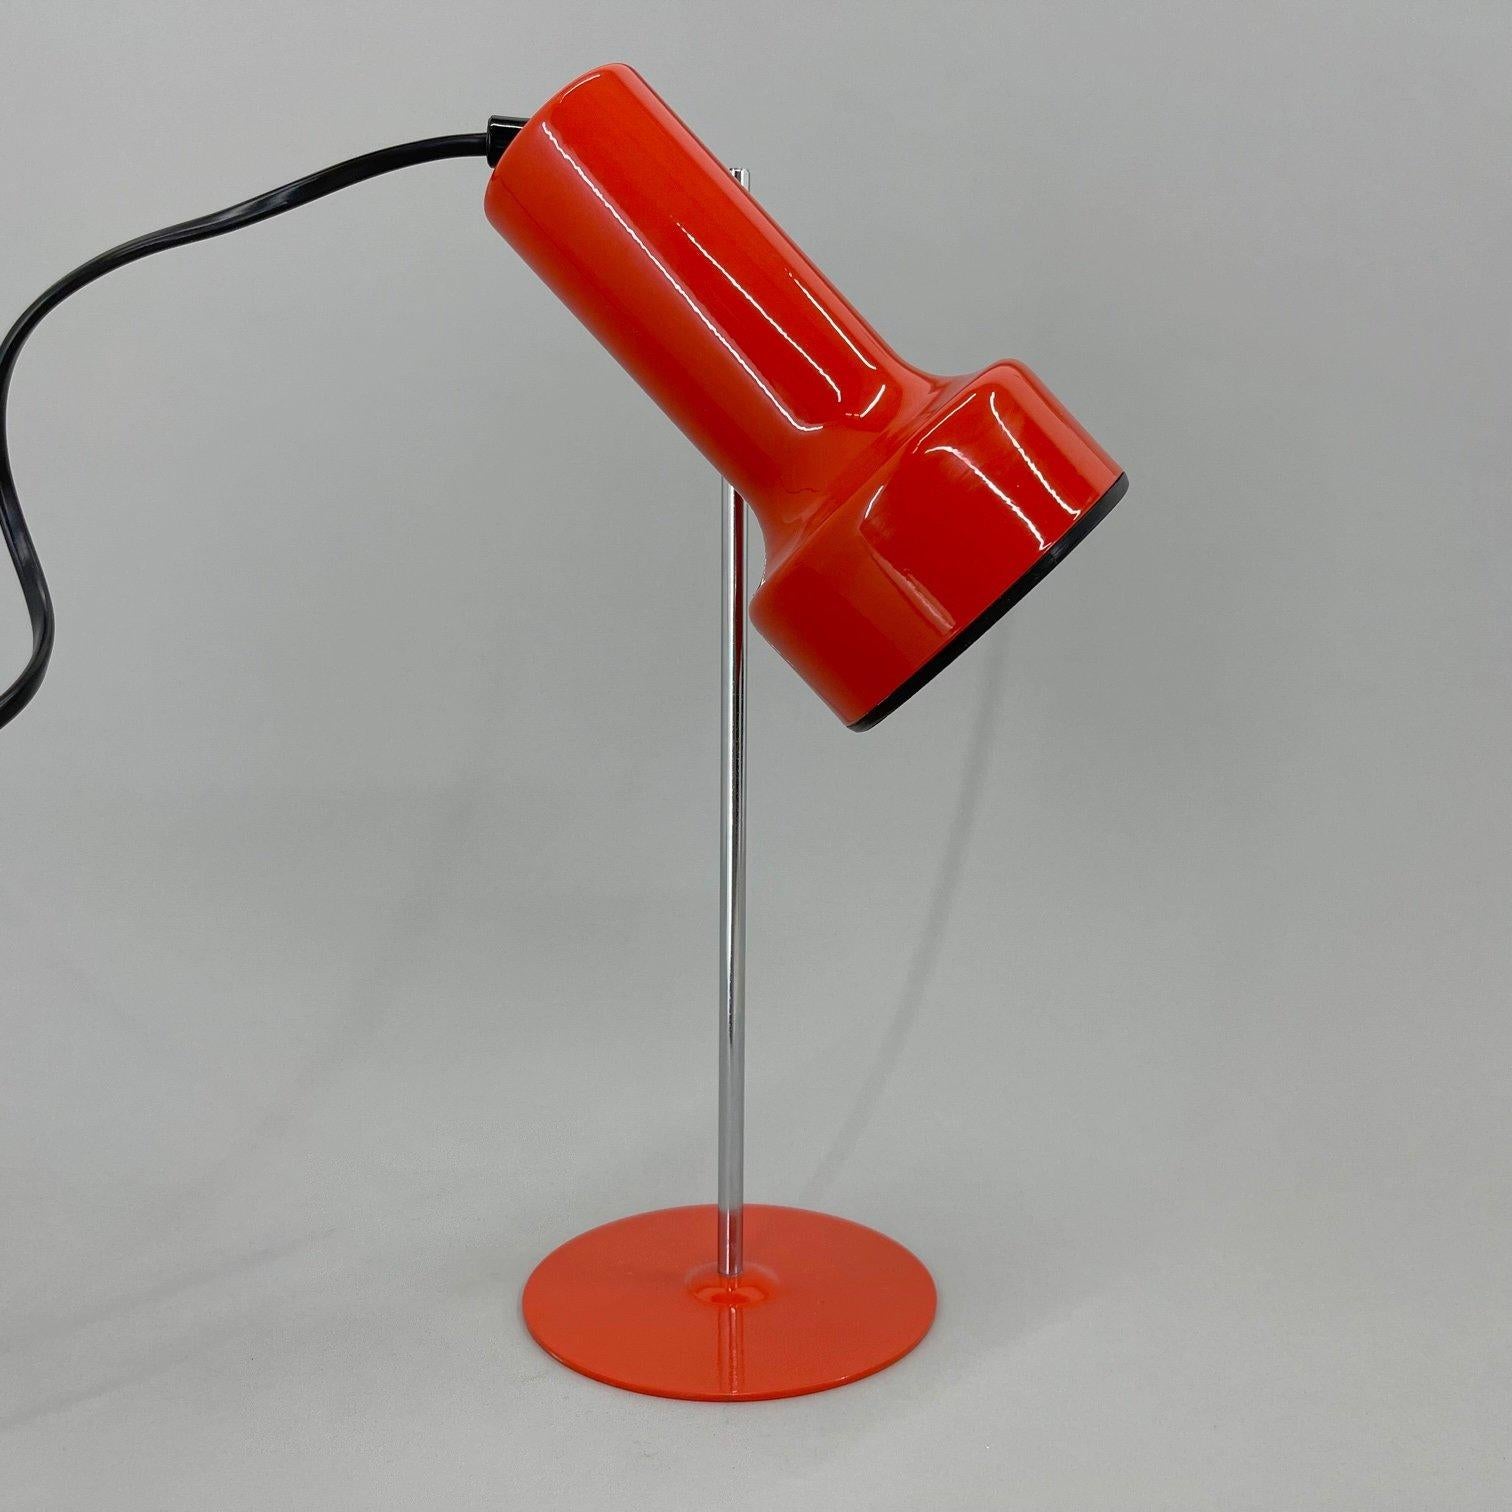 Vintage table lamp from the 1970's, produced in Switzerland. The hight and position of the shade can be easily adjusted. Bulb: 1 x E25-E27.